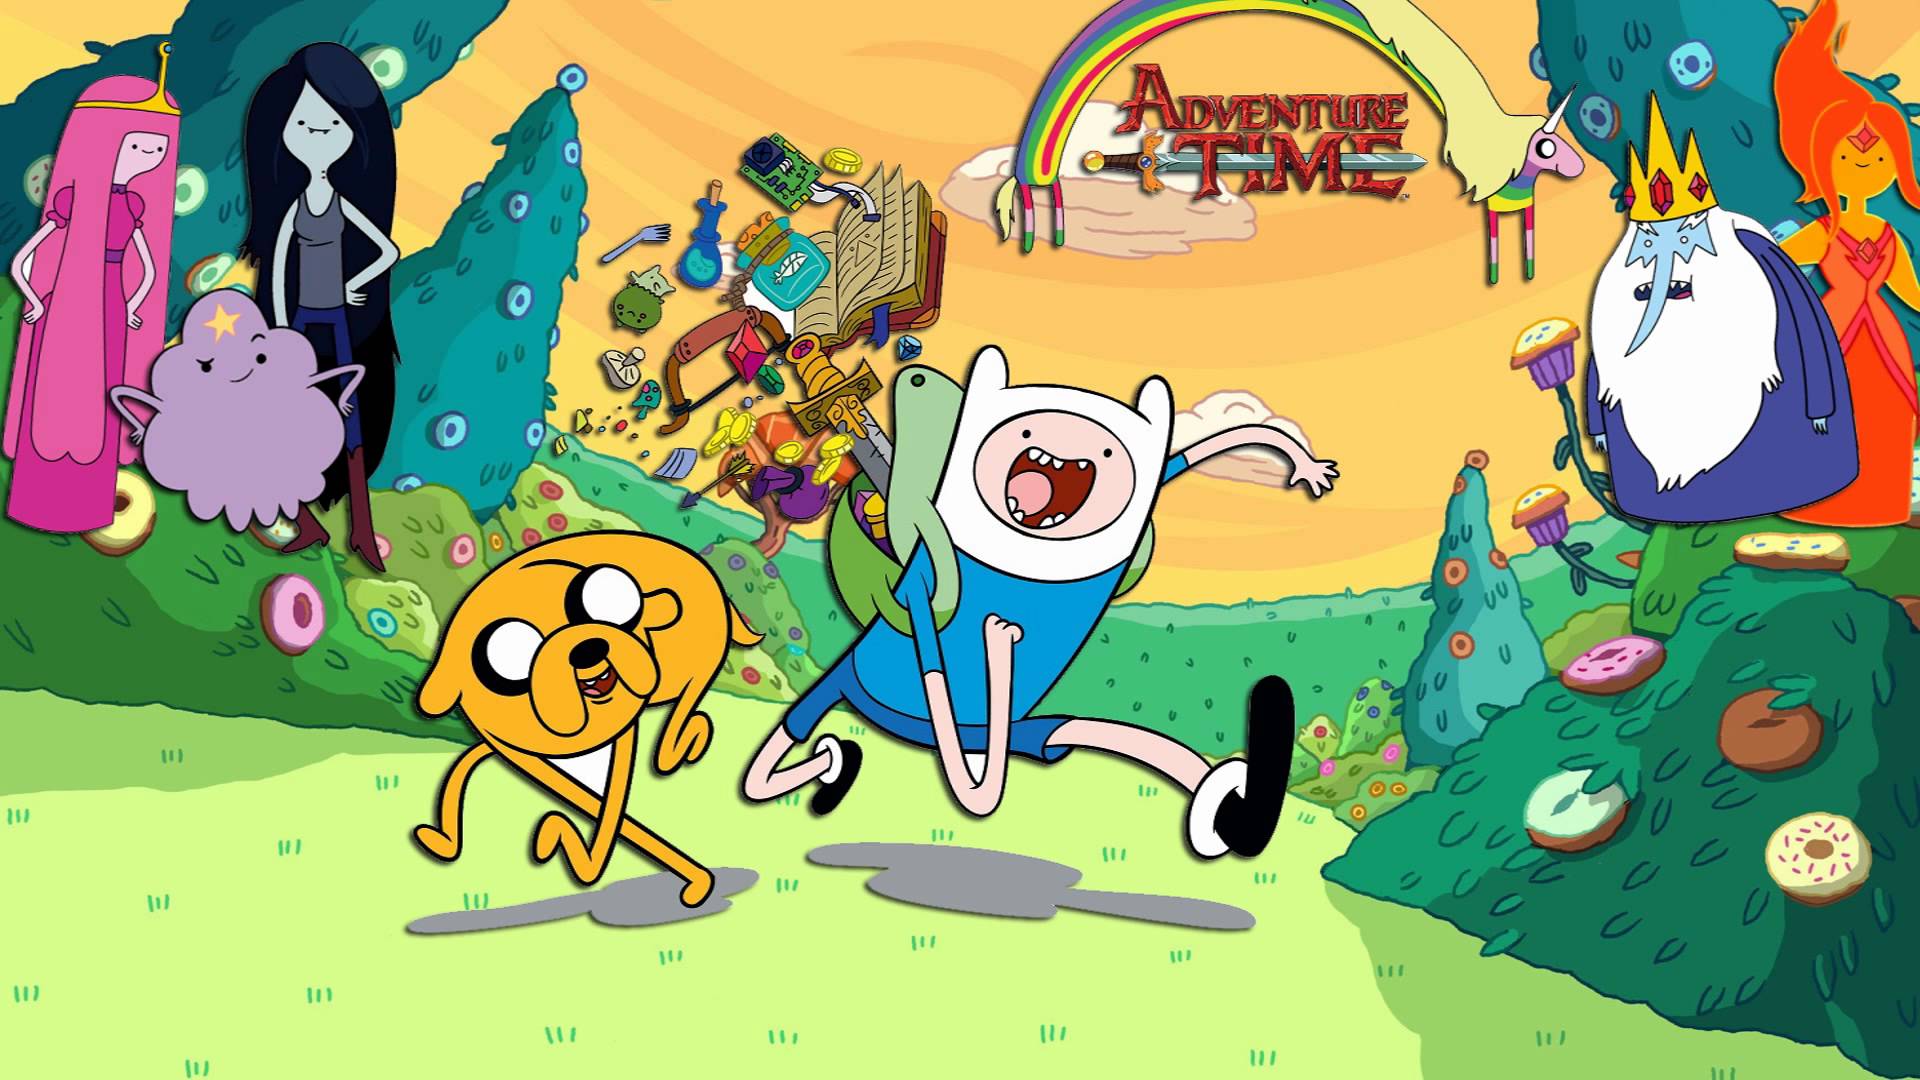 HD Finn and Jake Adventure Time 1080p Wallpaper Full Size ...